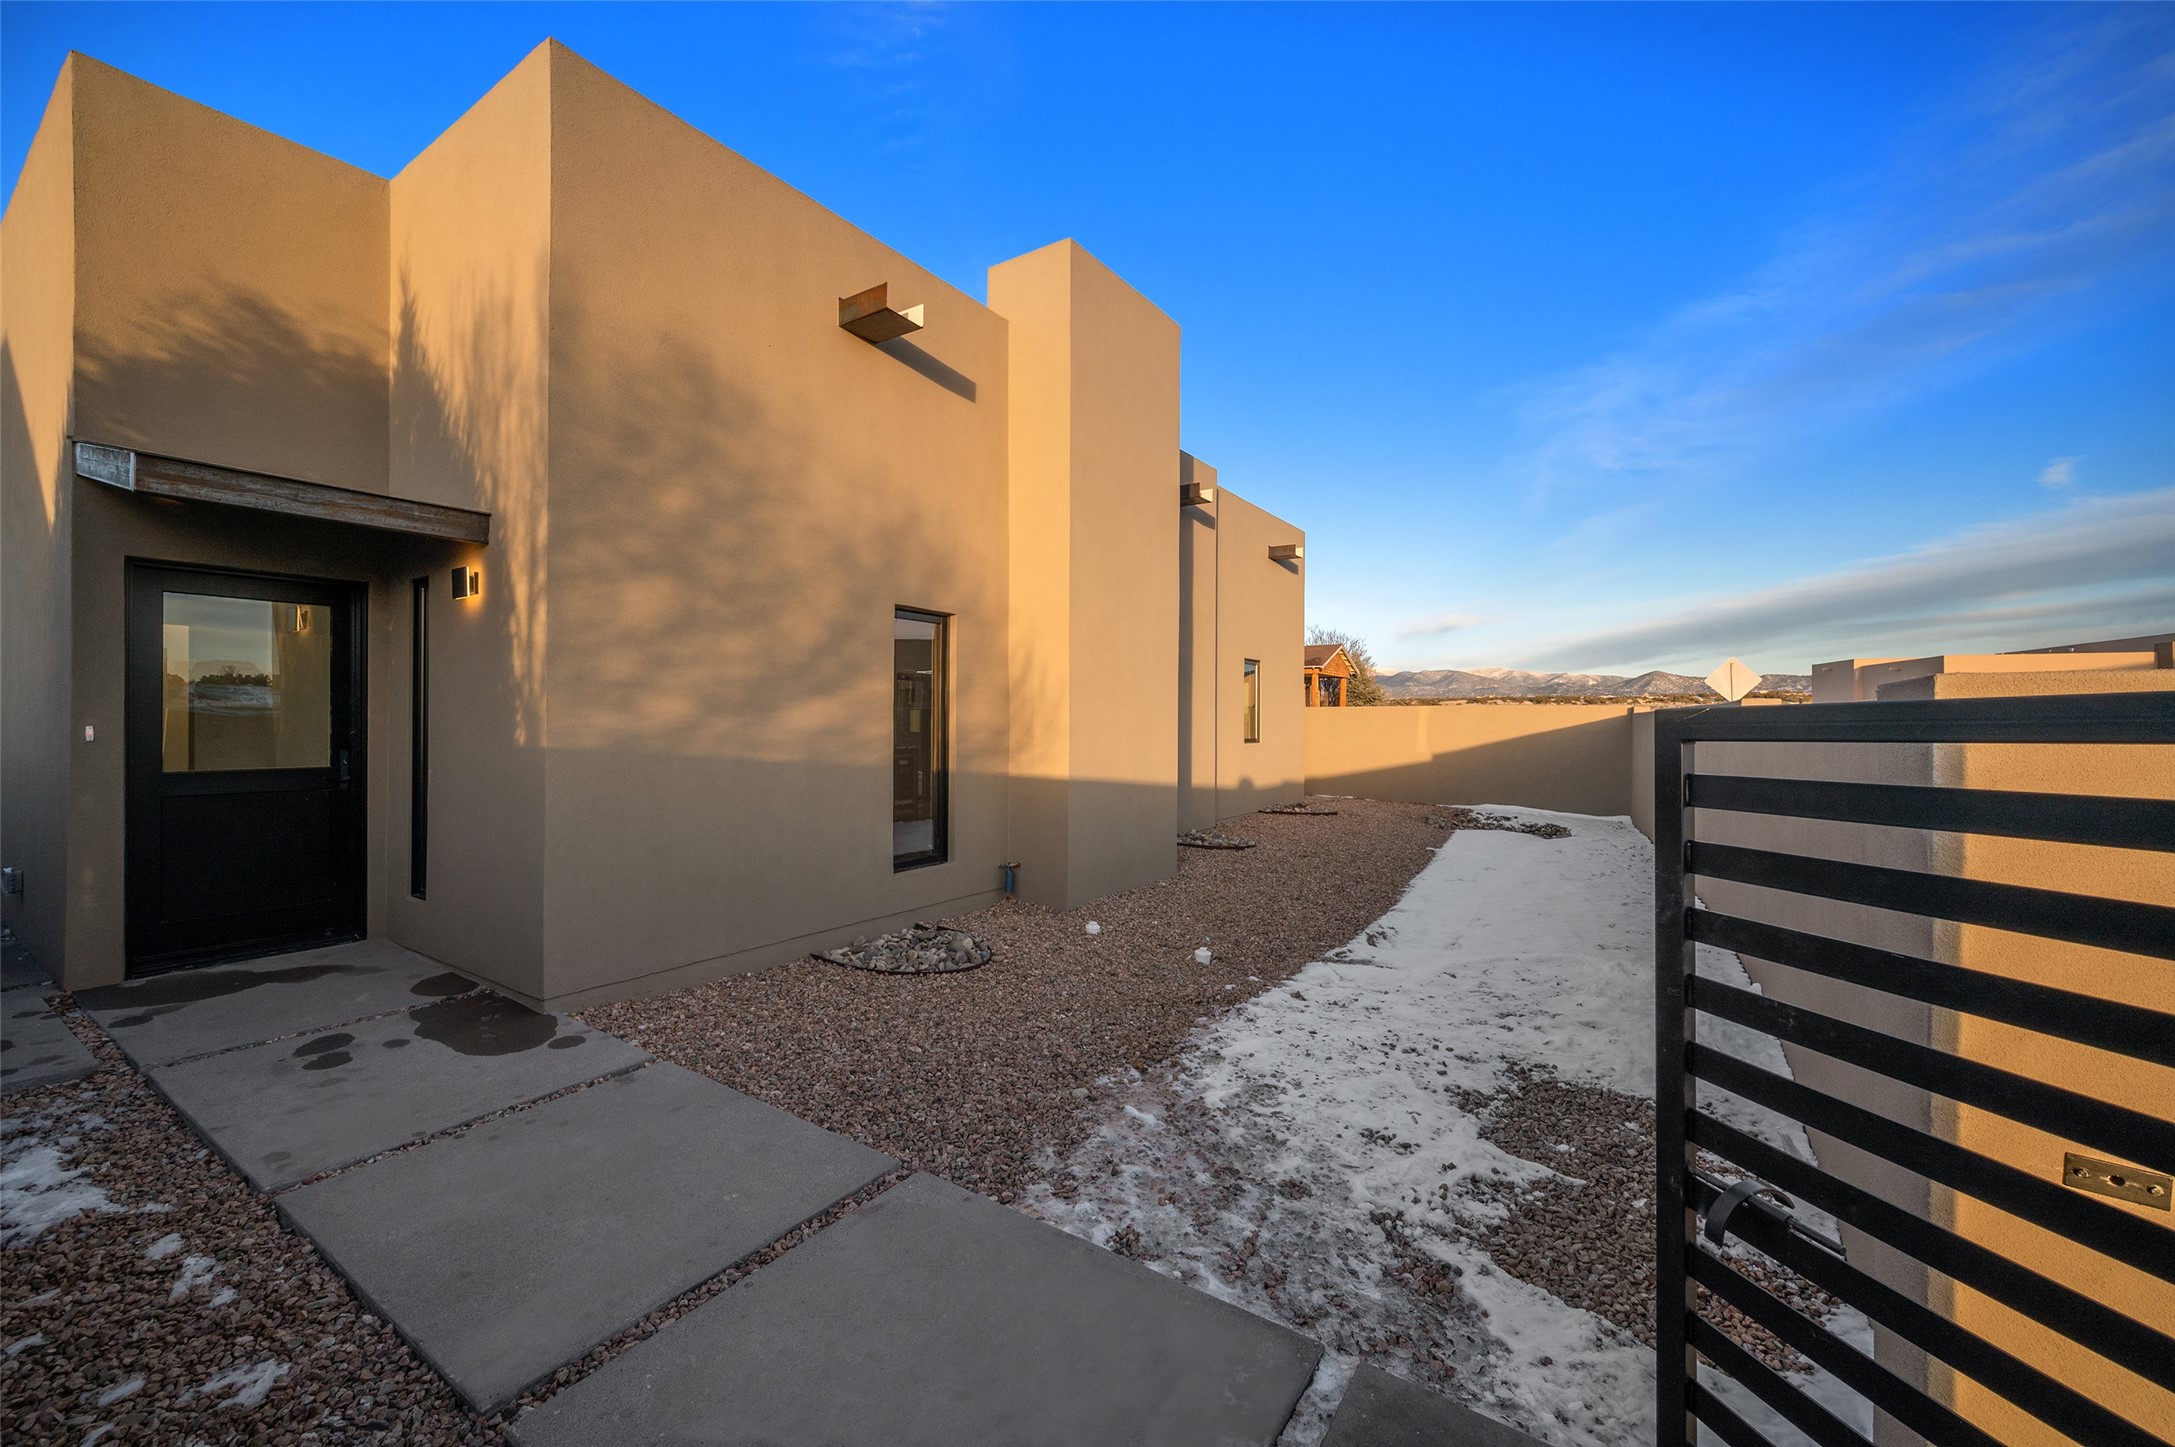 31 Willow Back Road, Santa Fe, New Mexico 87508, 3 Bedrooms Bedrooms, ,3 BathroomsBathrooms,Residential,For Sale,31 Willow Back Road,202232813